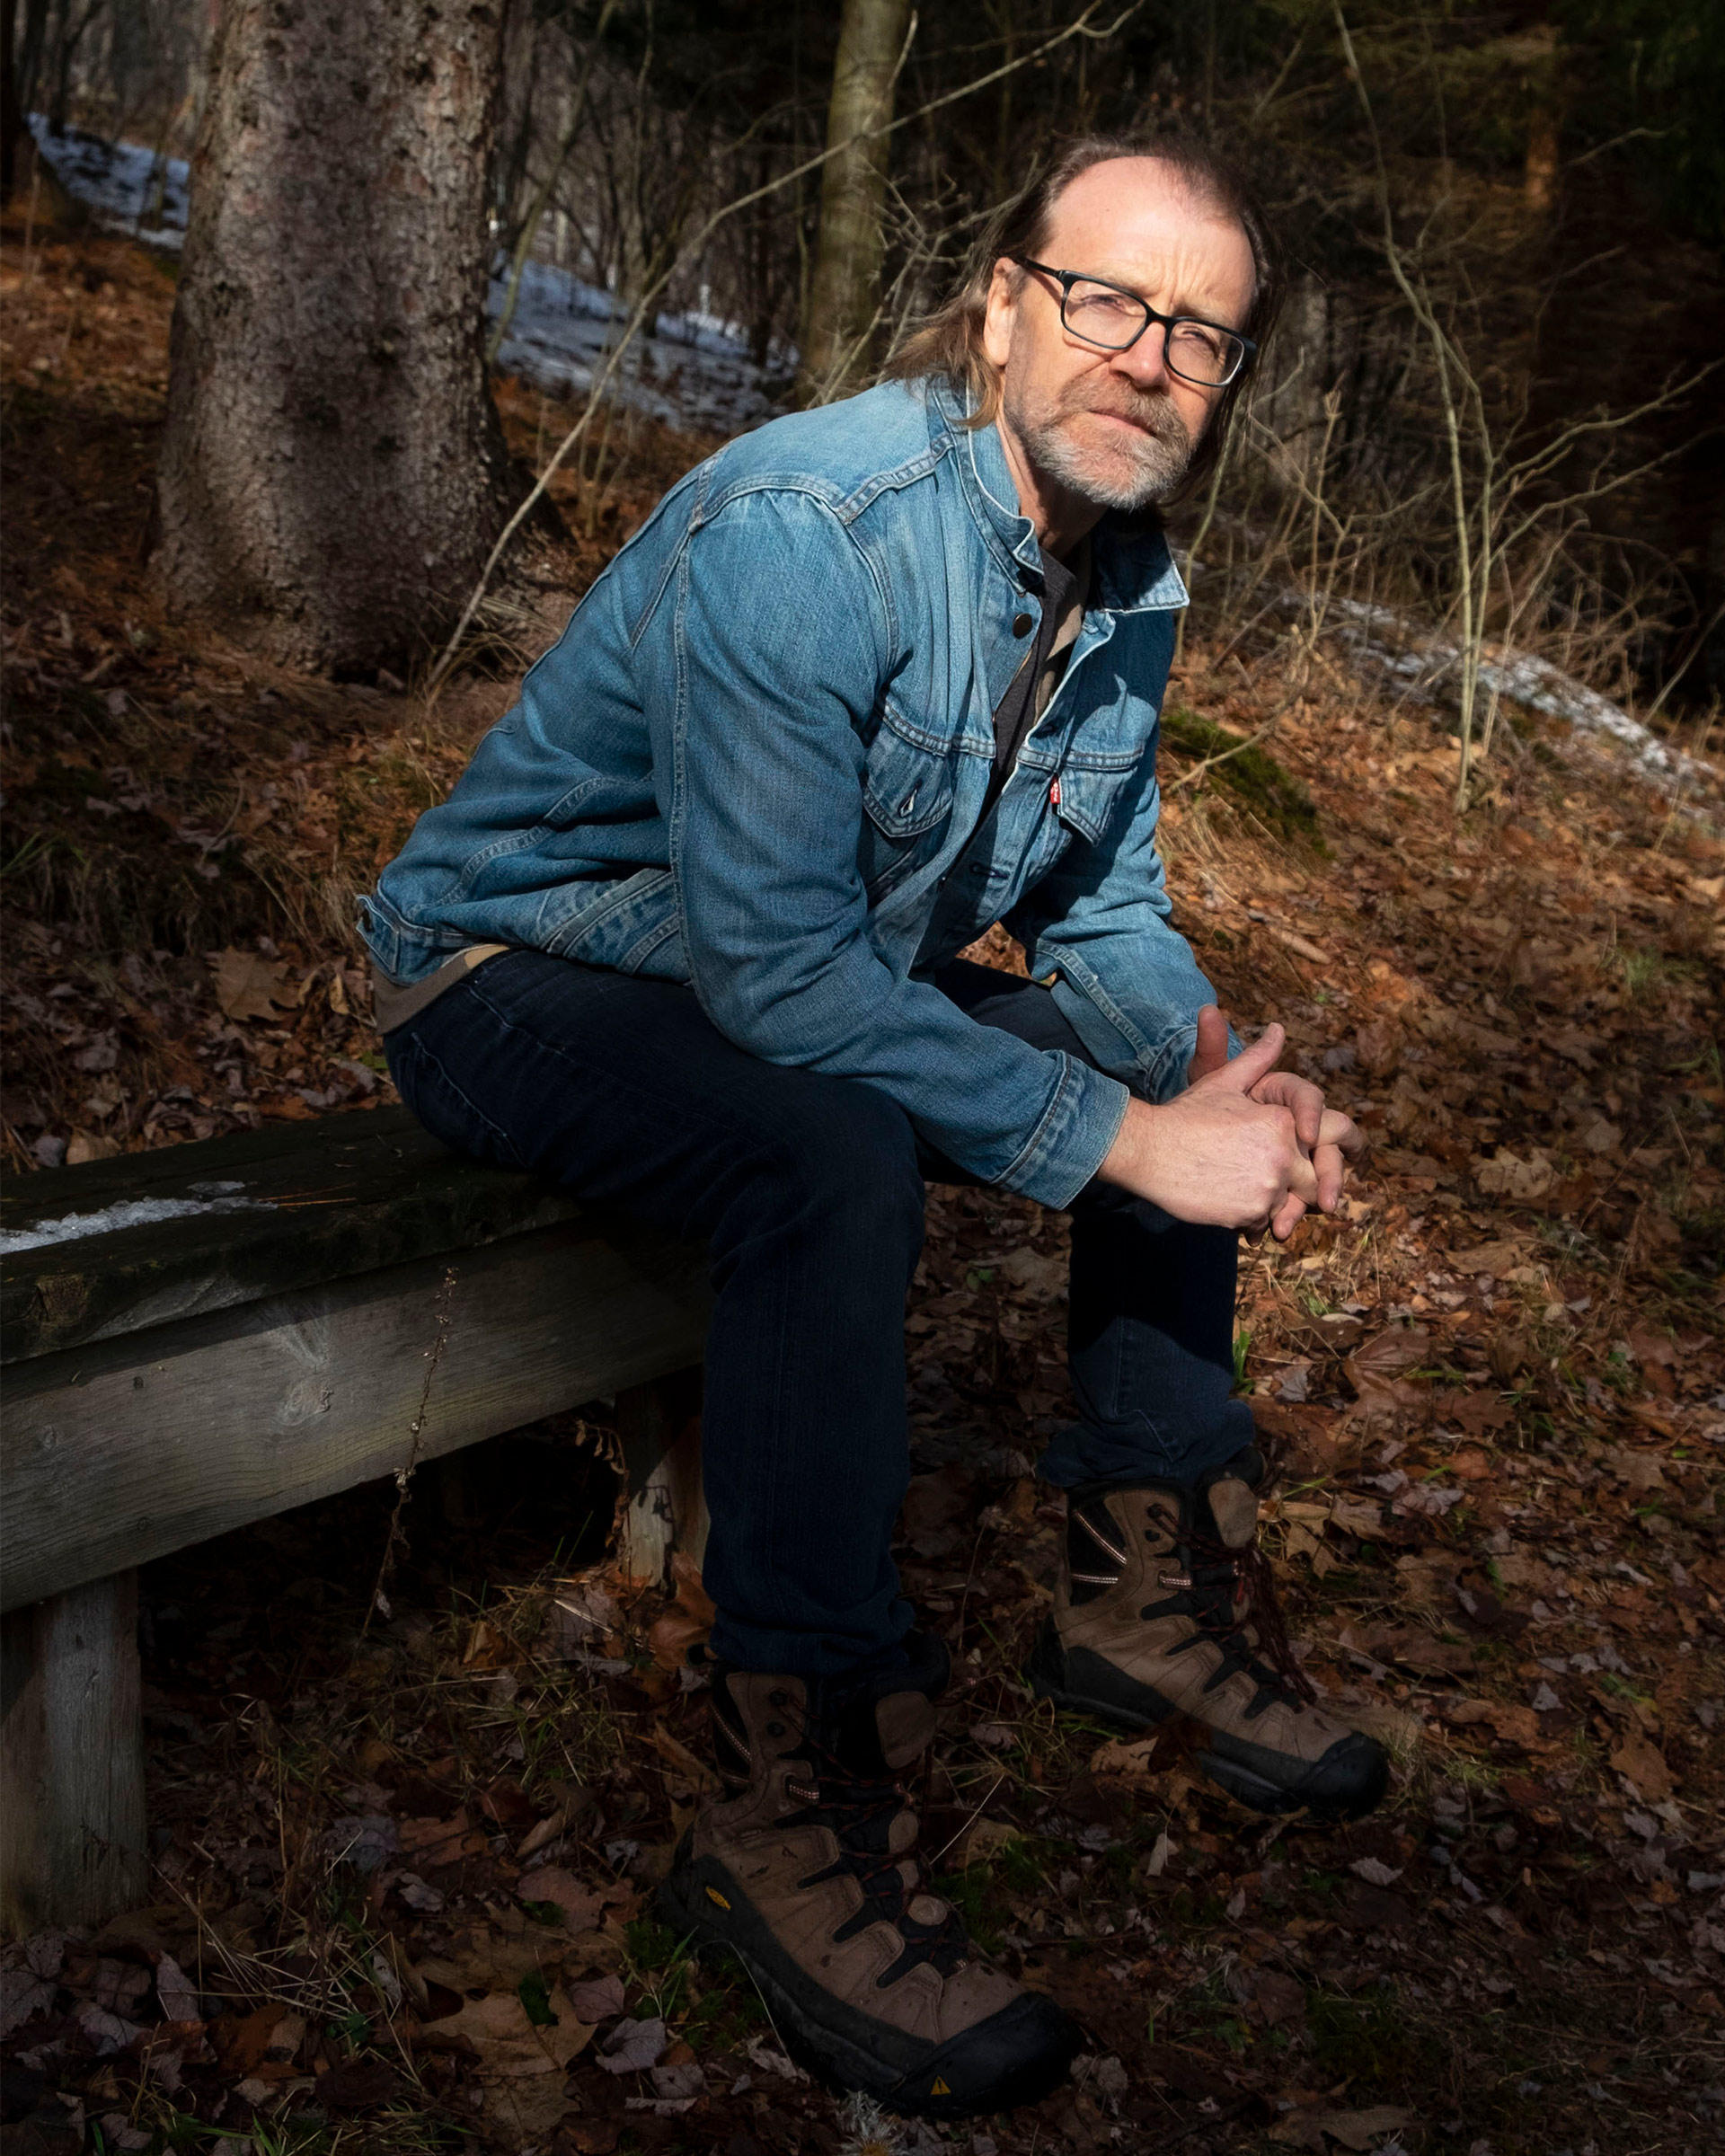 Author George Saunders photographed by his daughter at home in New York state. (Alena Mae Saunders—Guardian/eyevine/Redux)